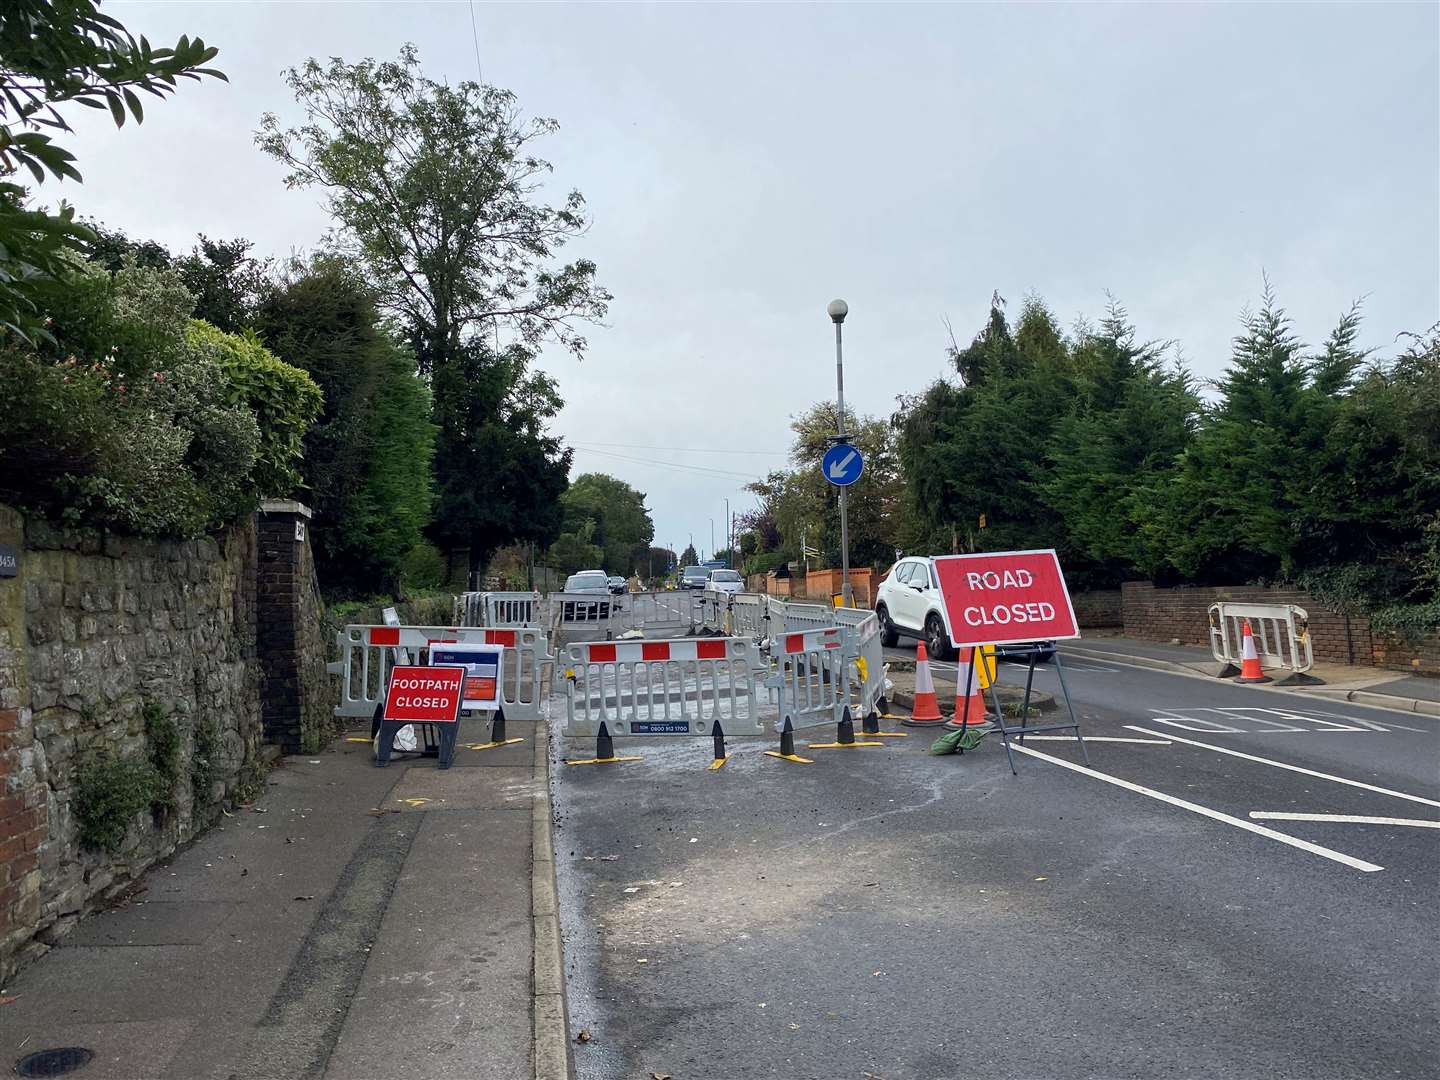 The road is shut for emergency gas works